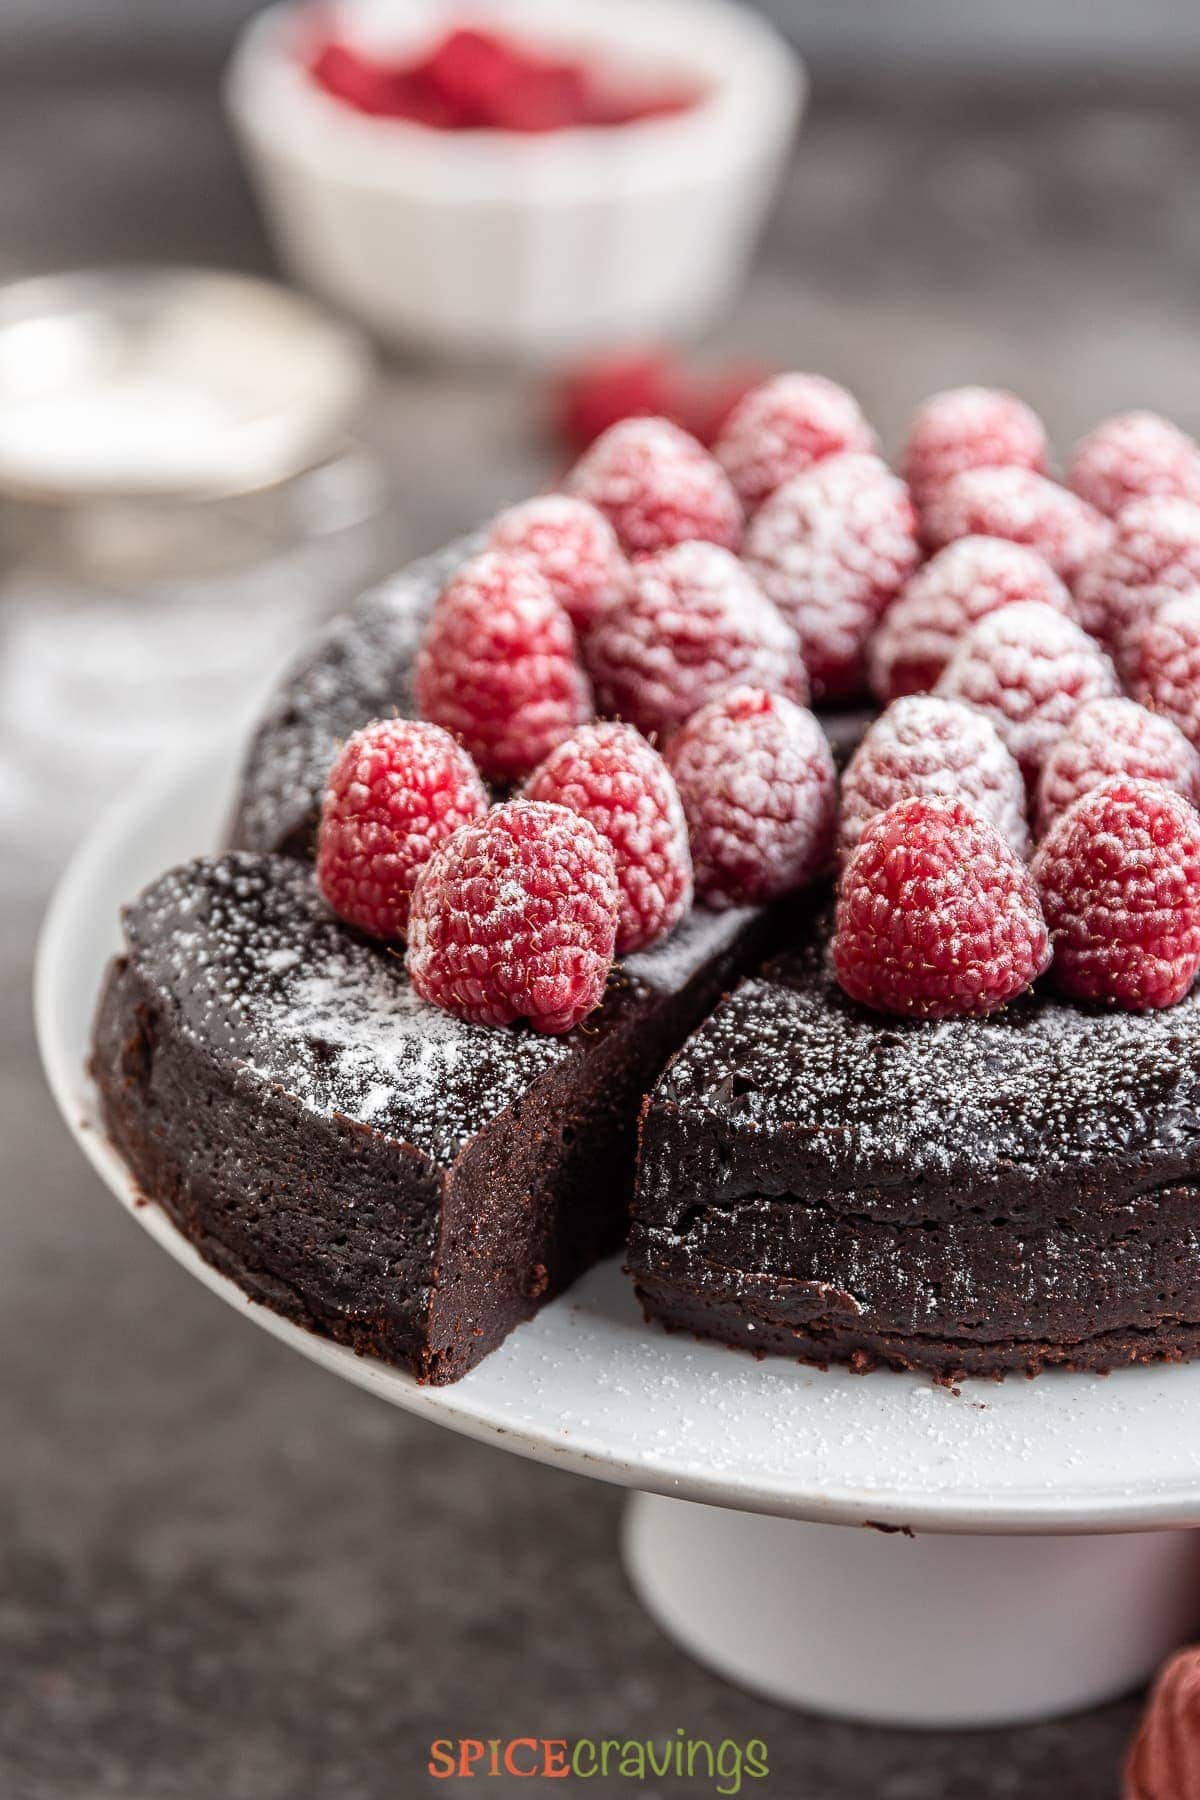 sliced chocolate flourless cake topped with raspberries and powdered sugar